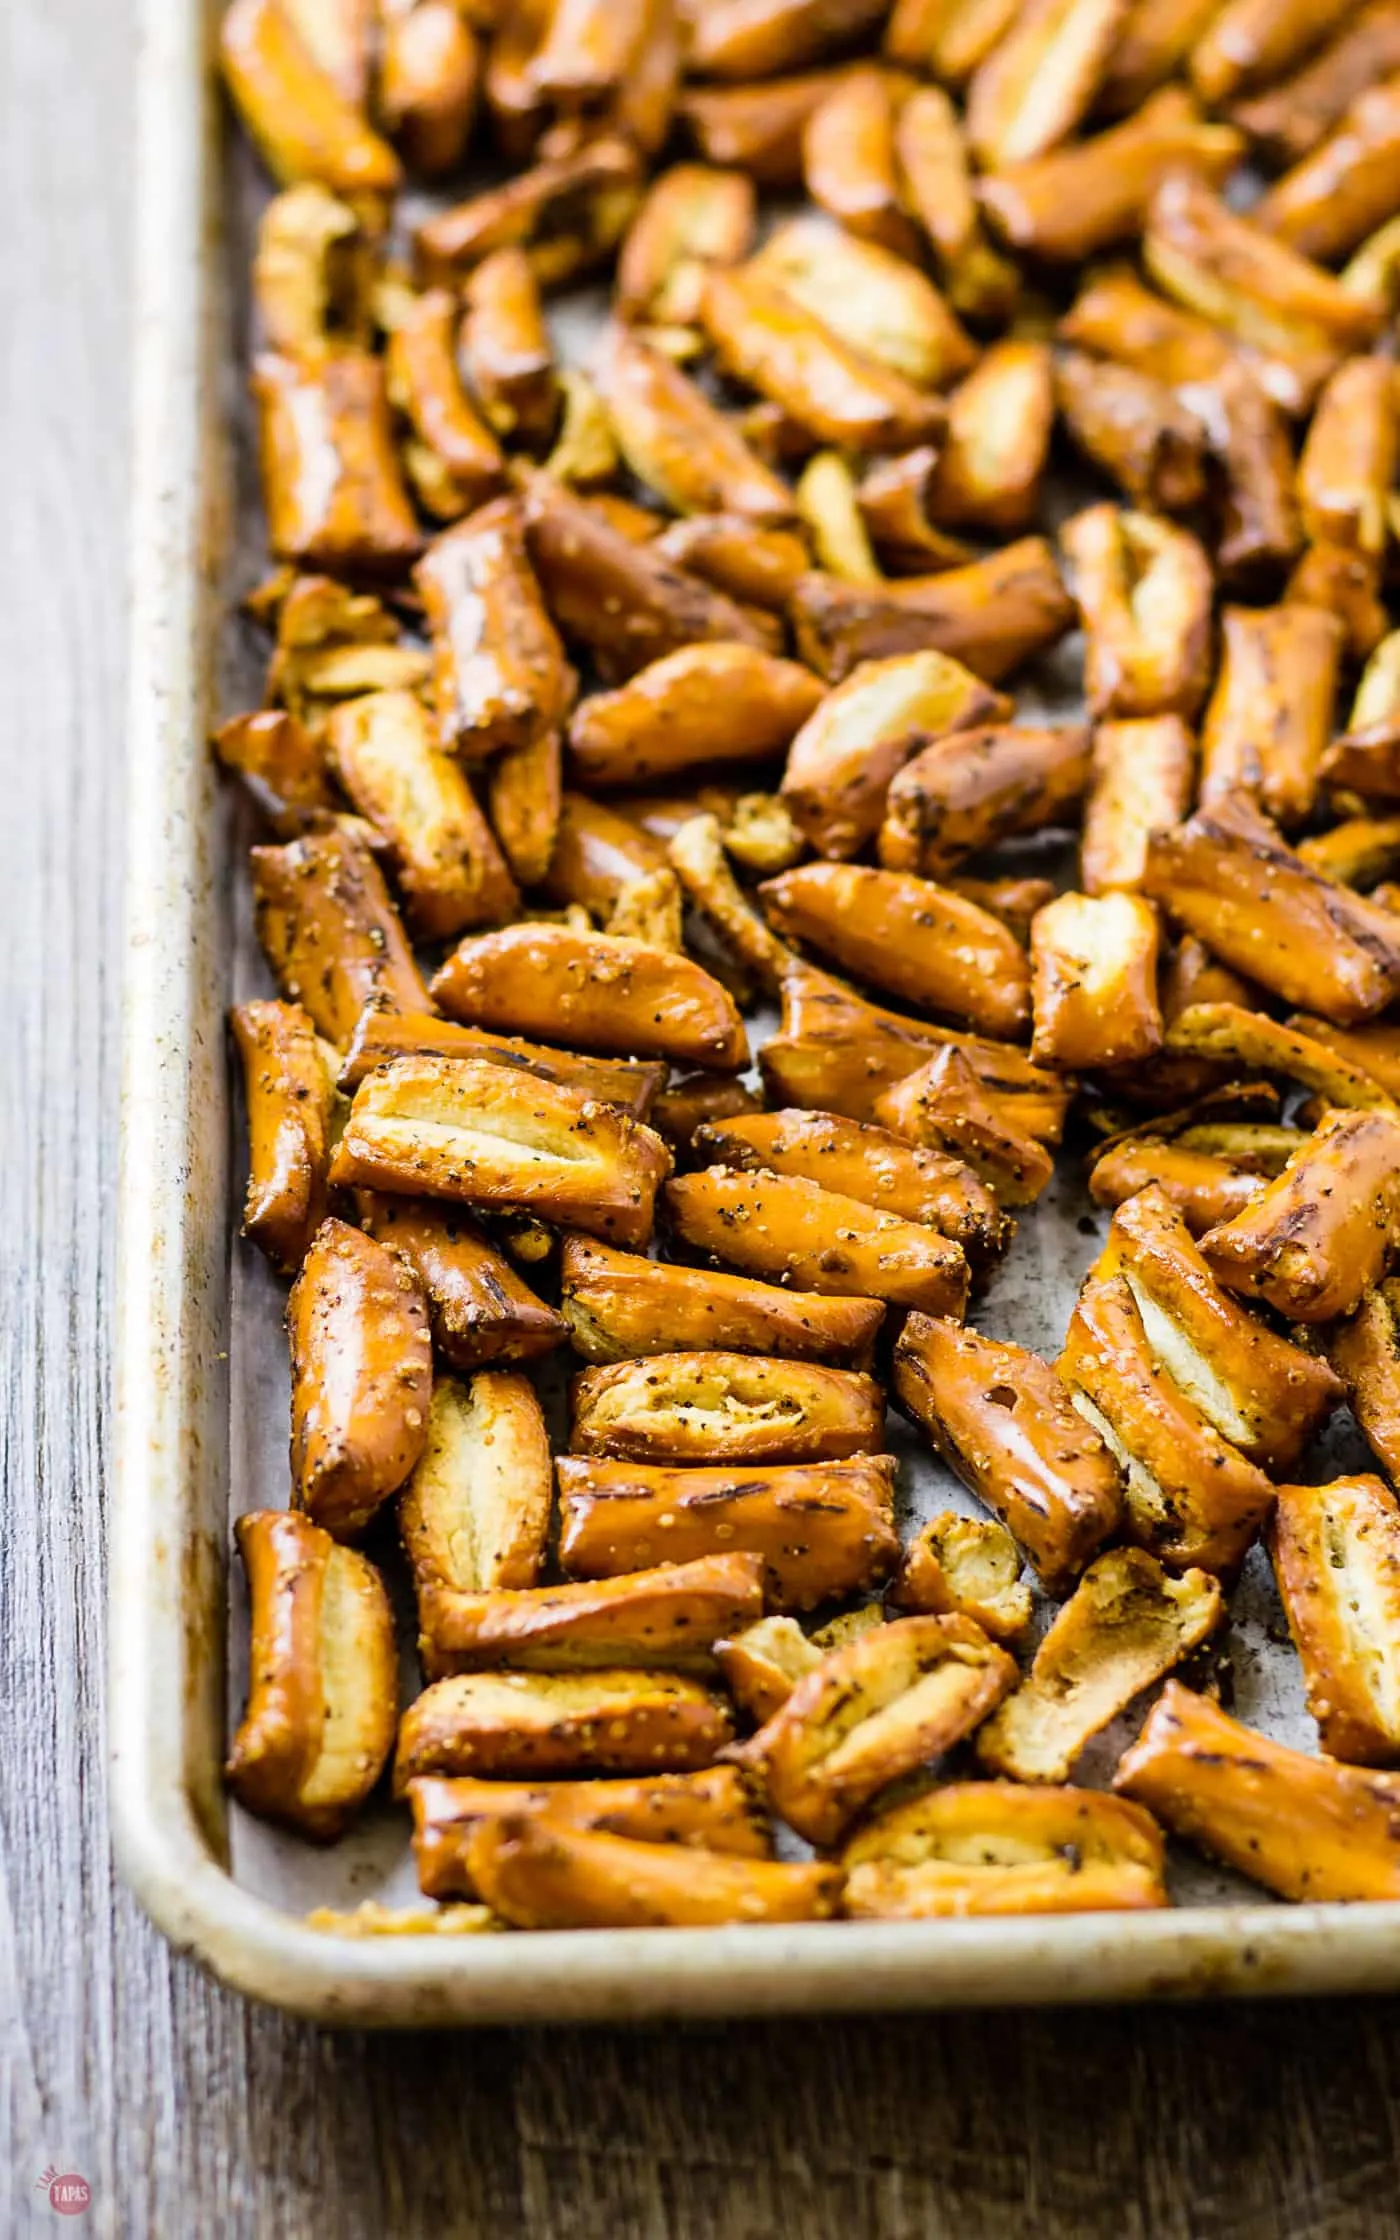 The seasoned pretzels spread out on a sheet pan ready to go in the oven